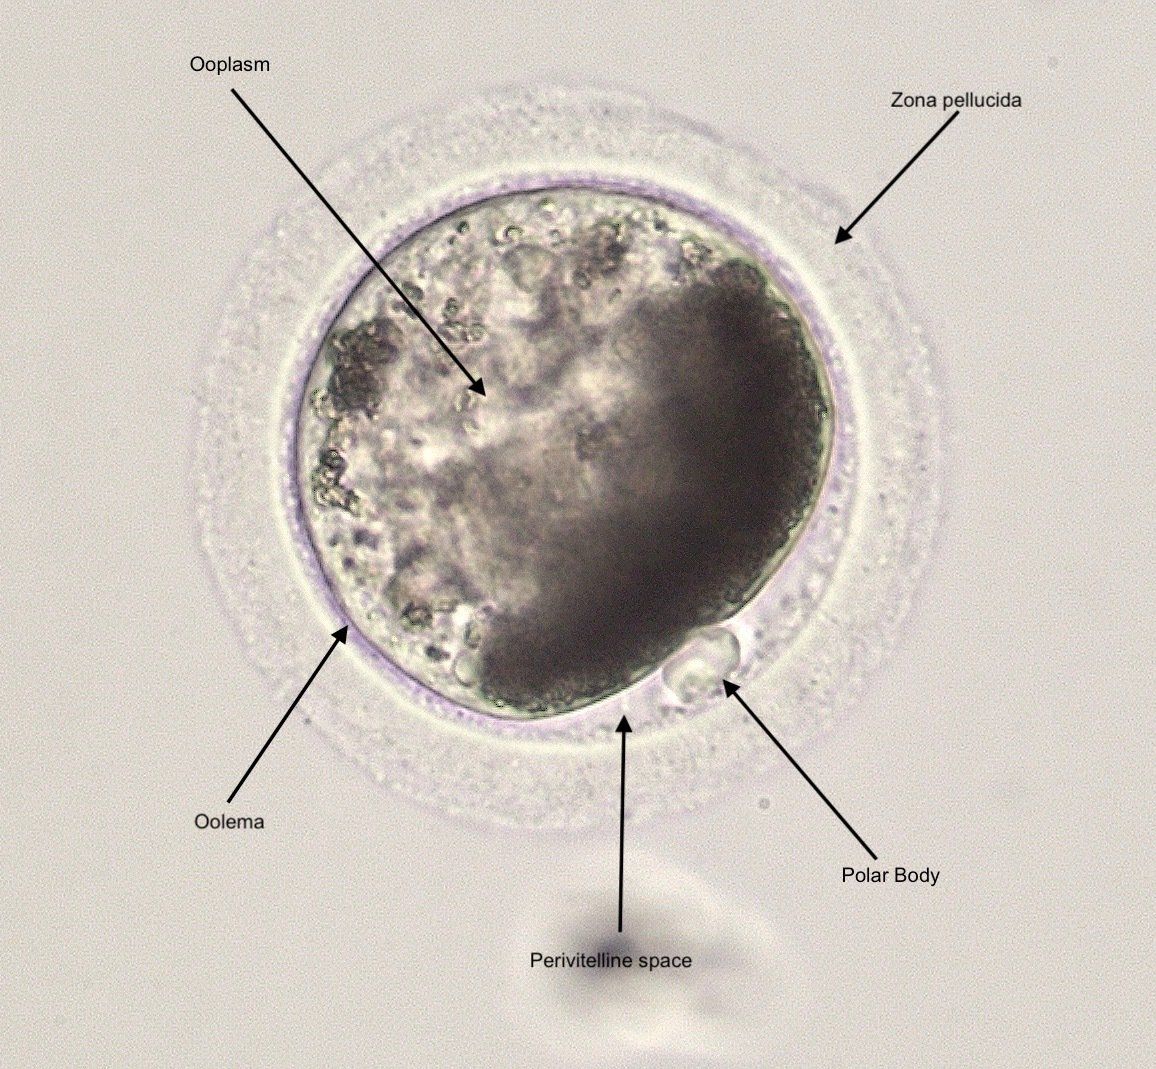 A mature oocyte at metaphase II, evidenced by the single polar body.